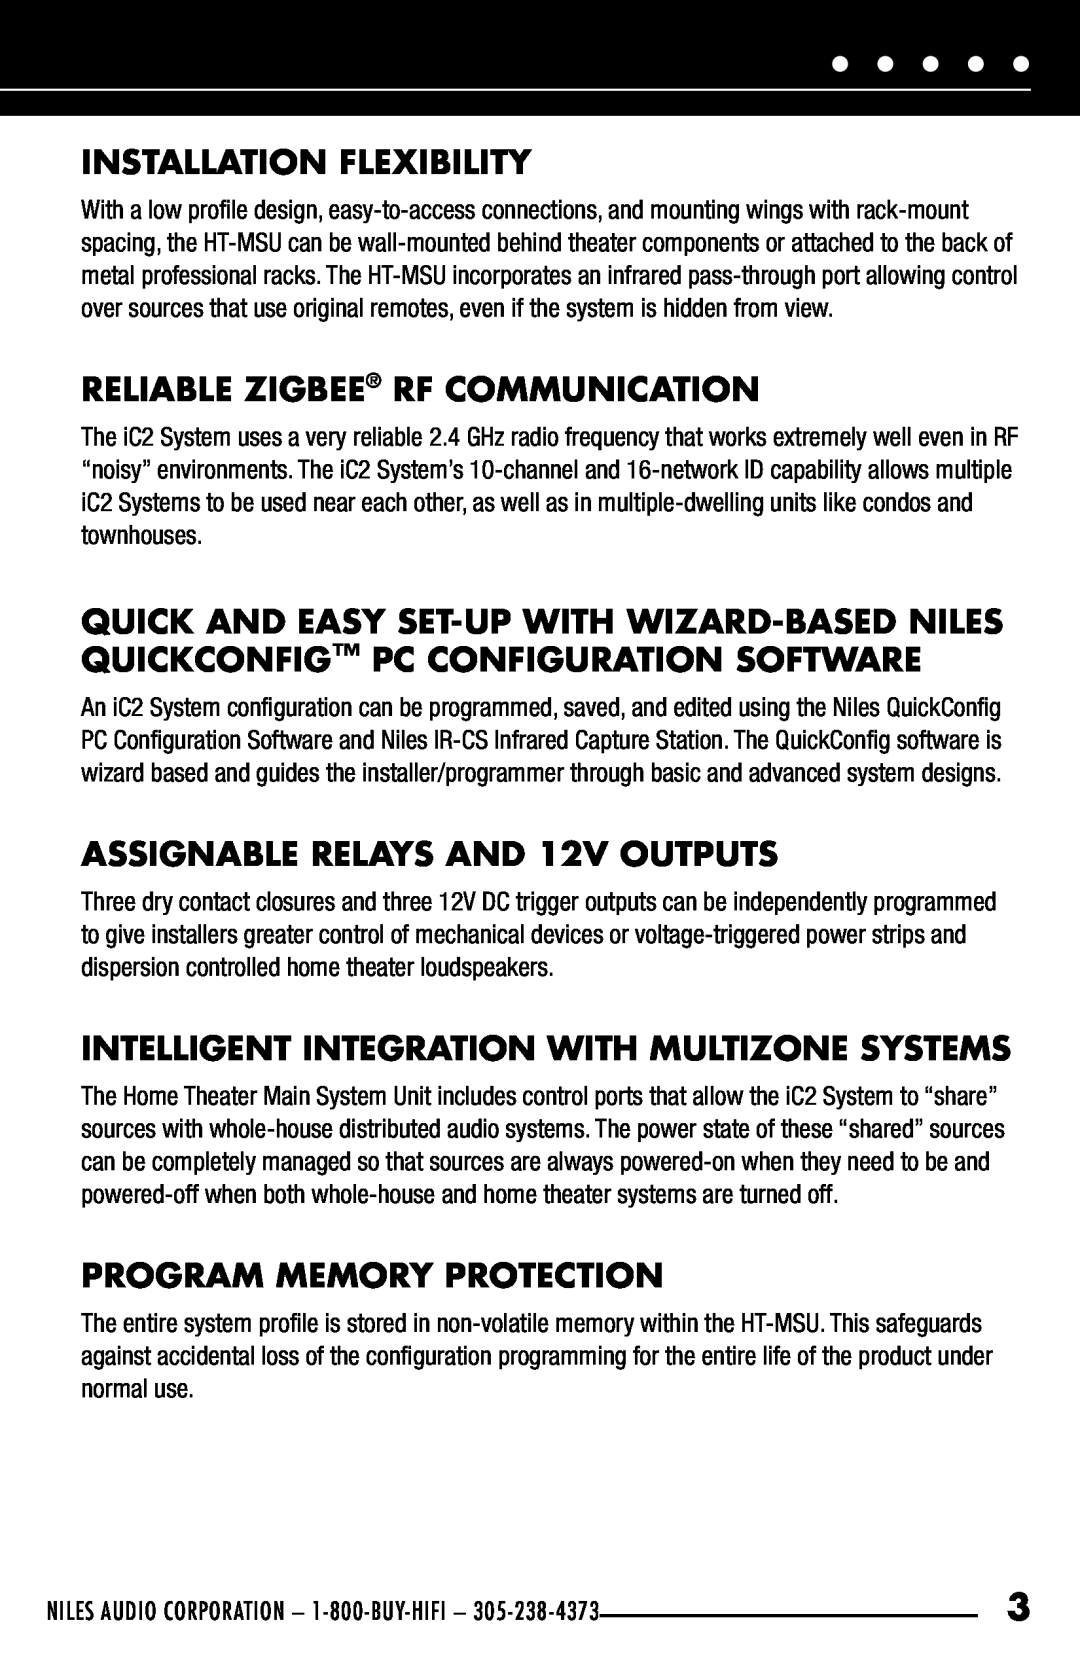 Niles Audio iC2 manual Installation Flexibility, Reliable Zigbee Rf Communication, ASSIGNABLE RELAYS AND 12V OUTPUTS 